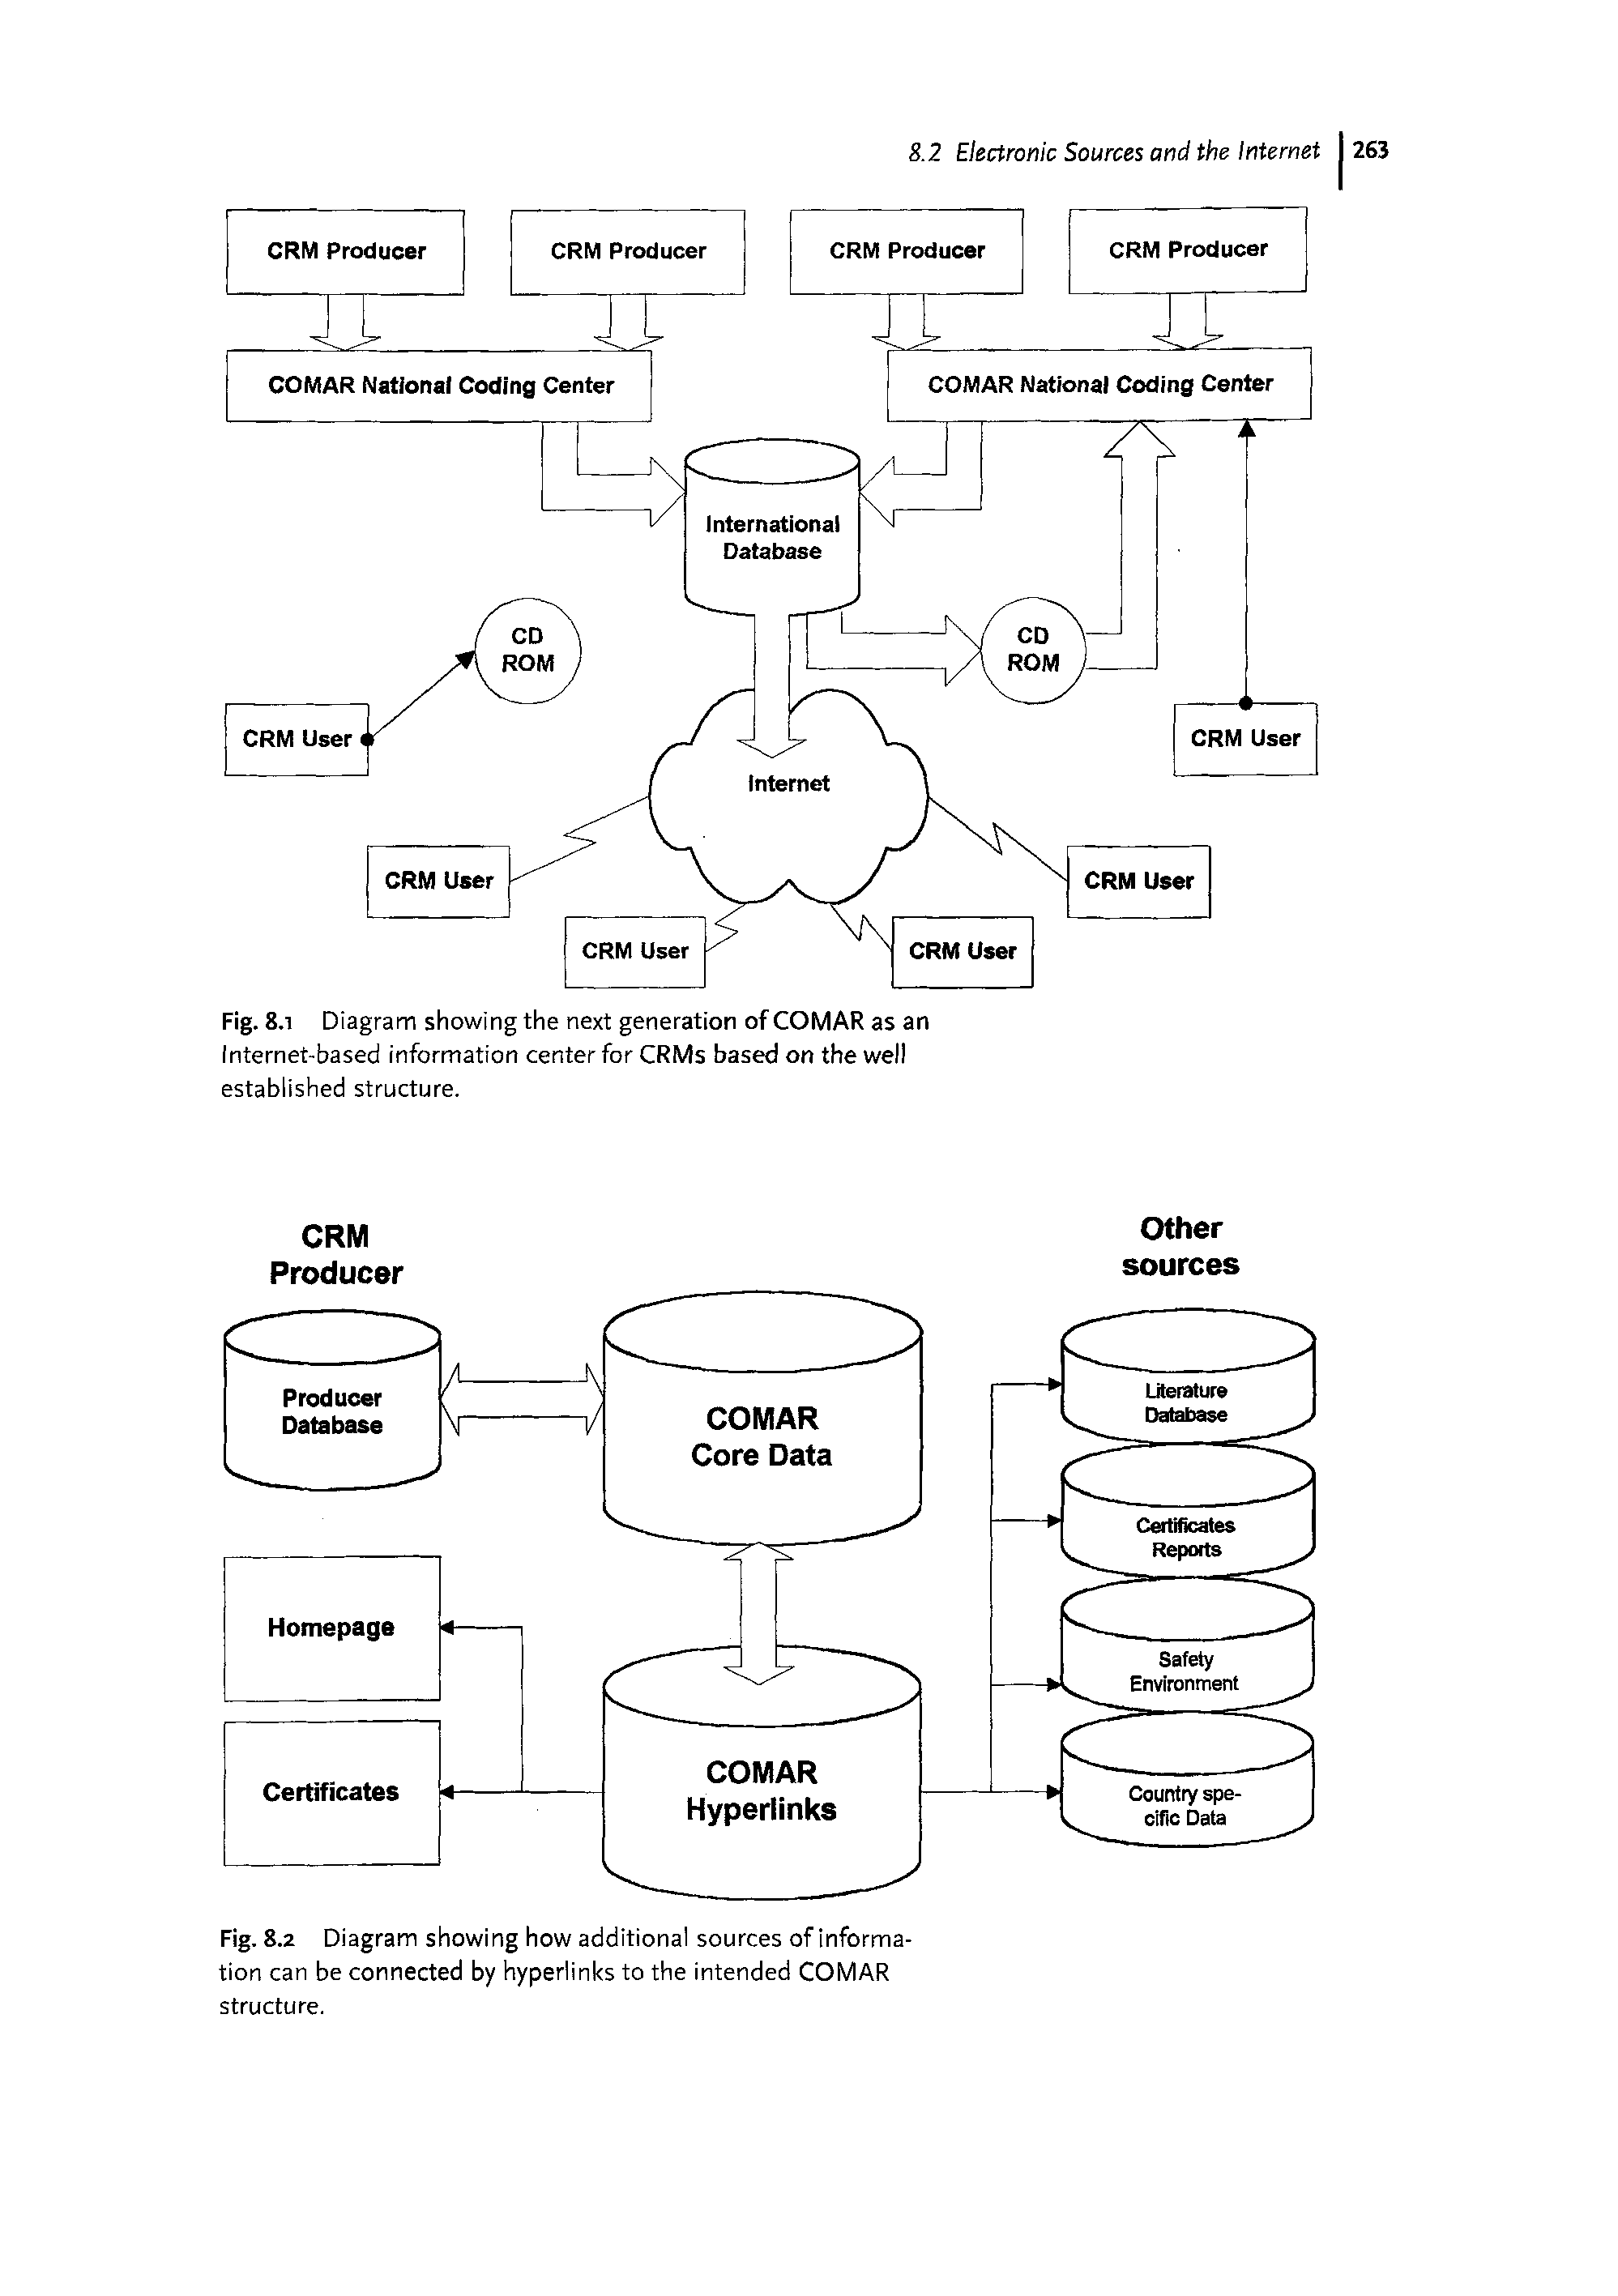 Fig. 8.2 Diagram showing how additional sources of information can be connected by hyperlinks to the intended COMAR structure.